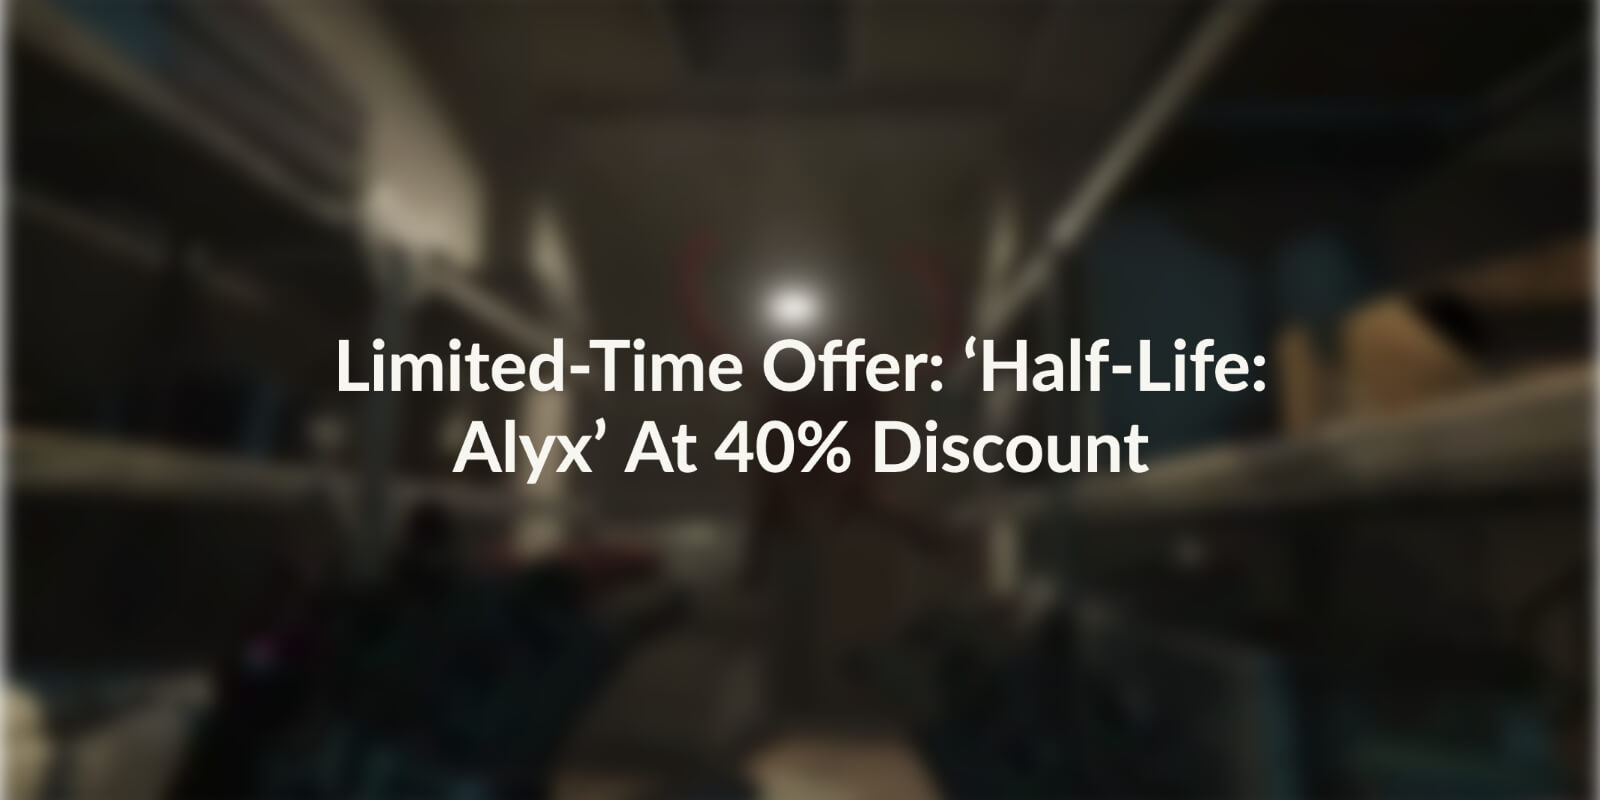 Image with blurred background saying, "Limited-Time Offer: 'Half-Life: Alyx' At 40% Discount"